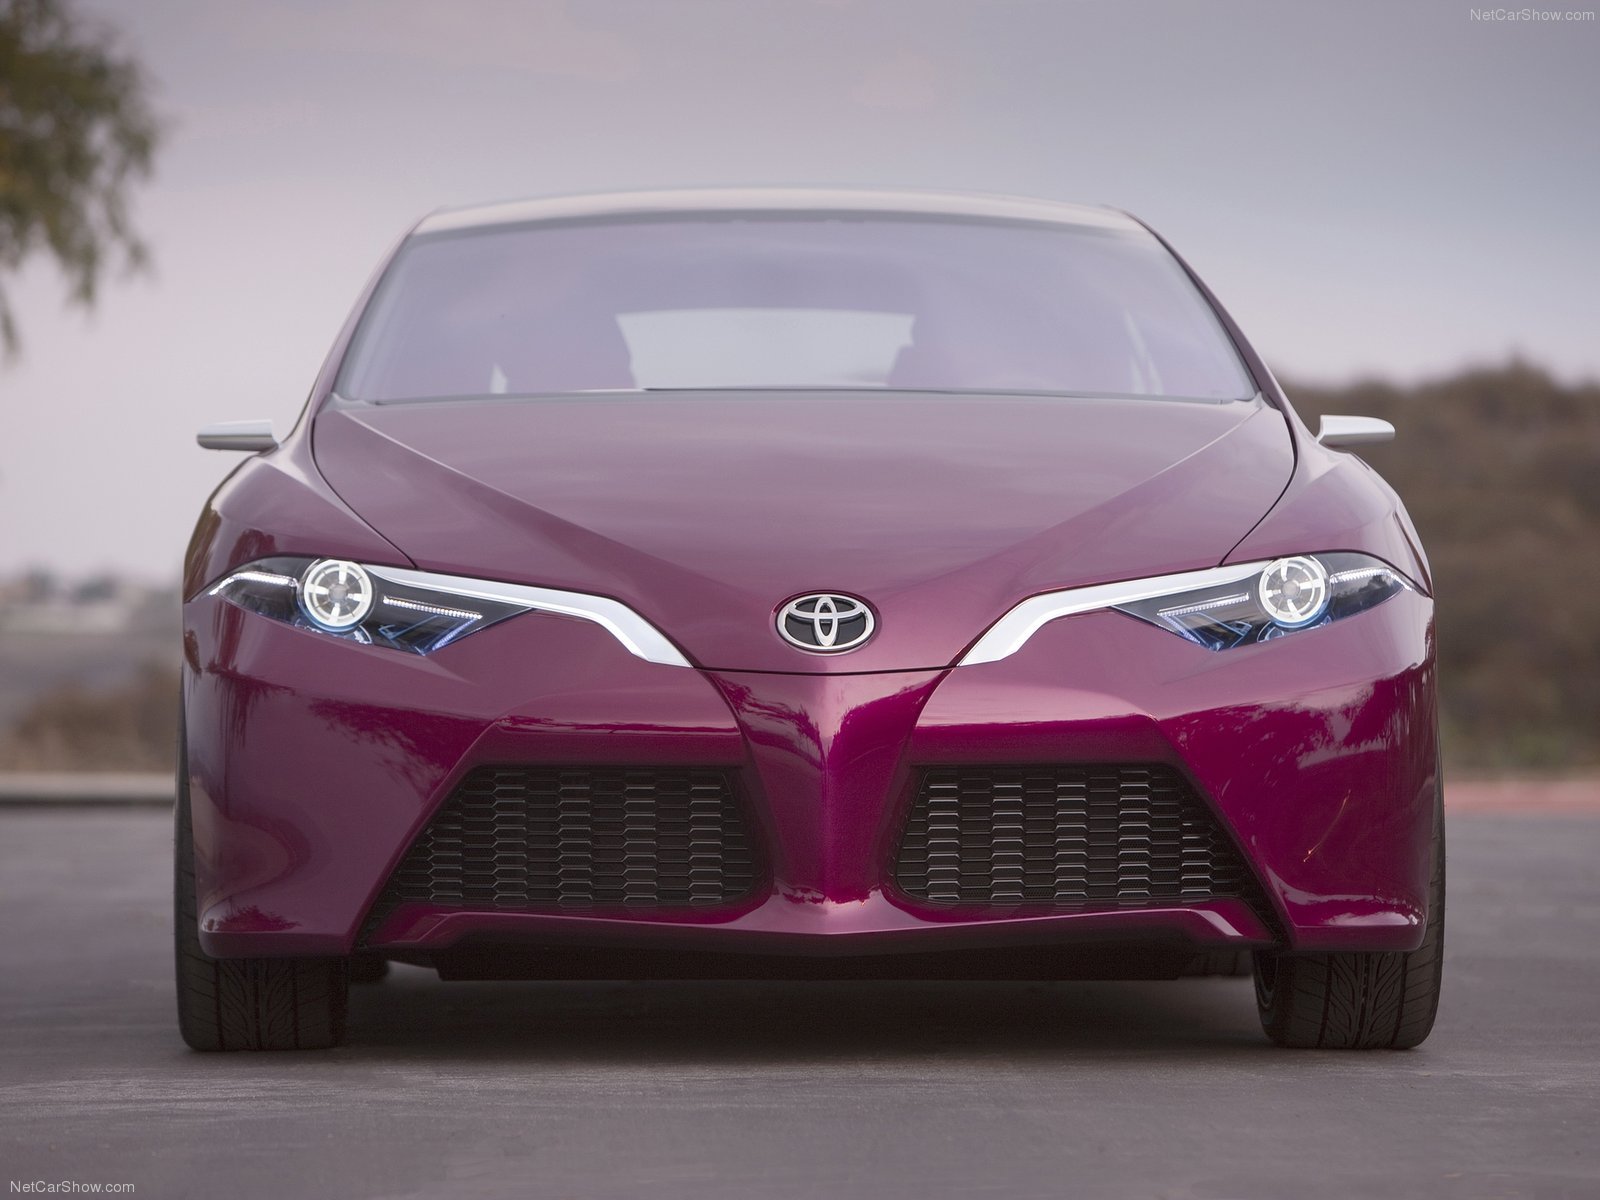 toyota, Ns4, Advanced, Plug in, Hybrid, Concept, Cars, 2012 Wallpaper